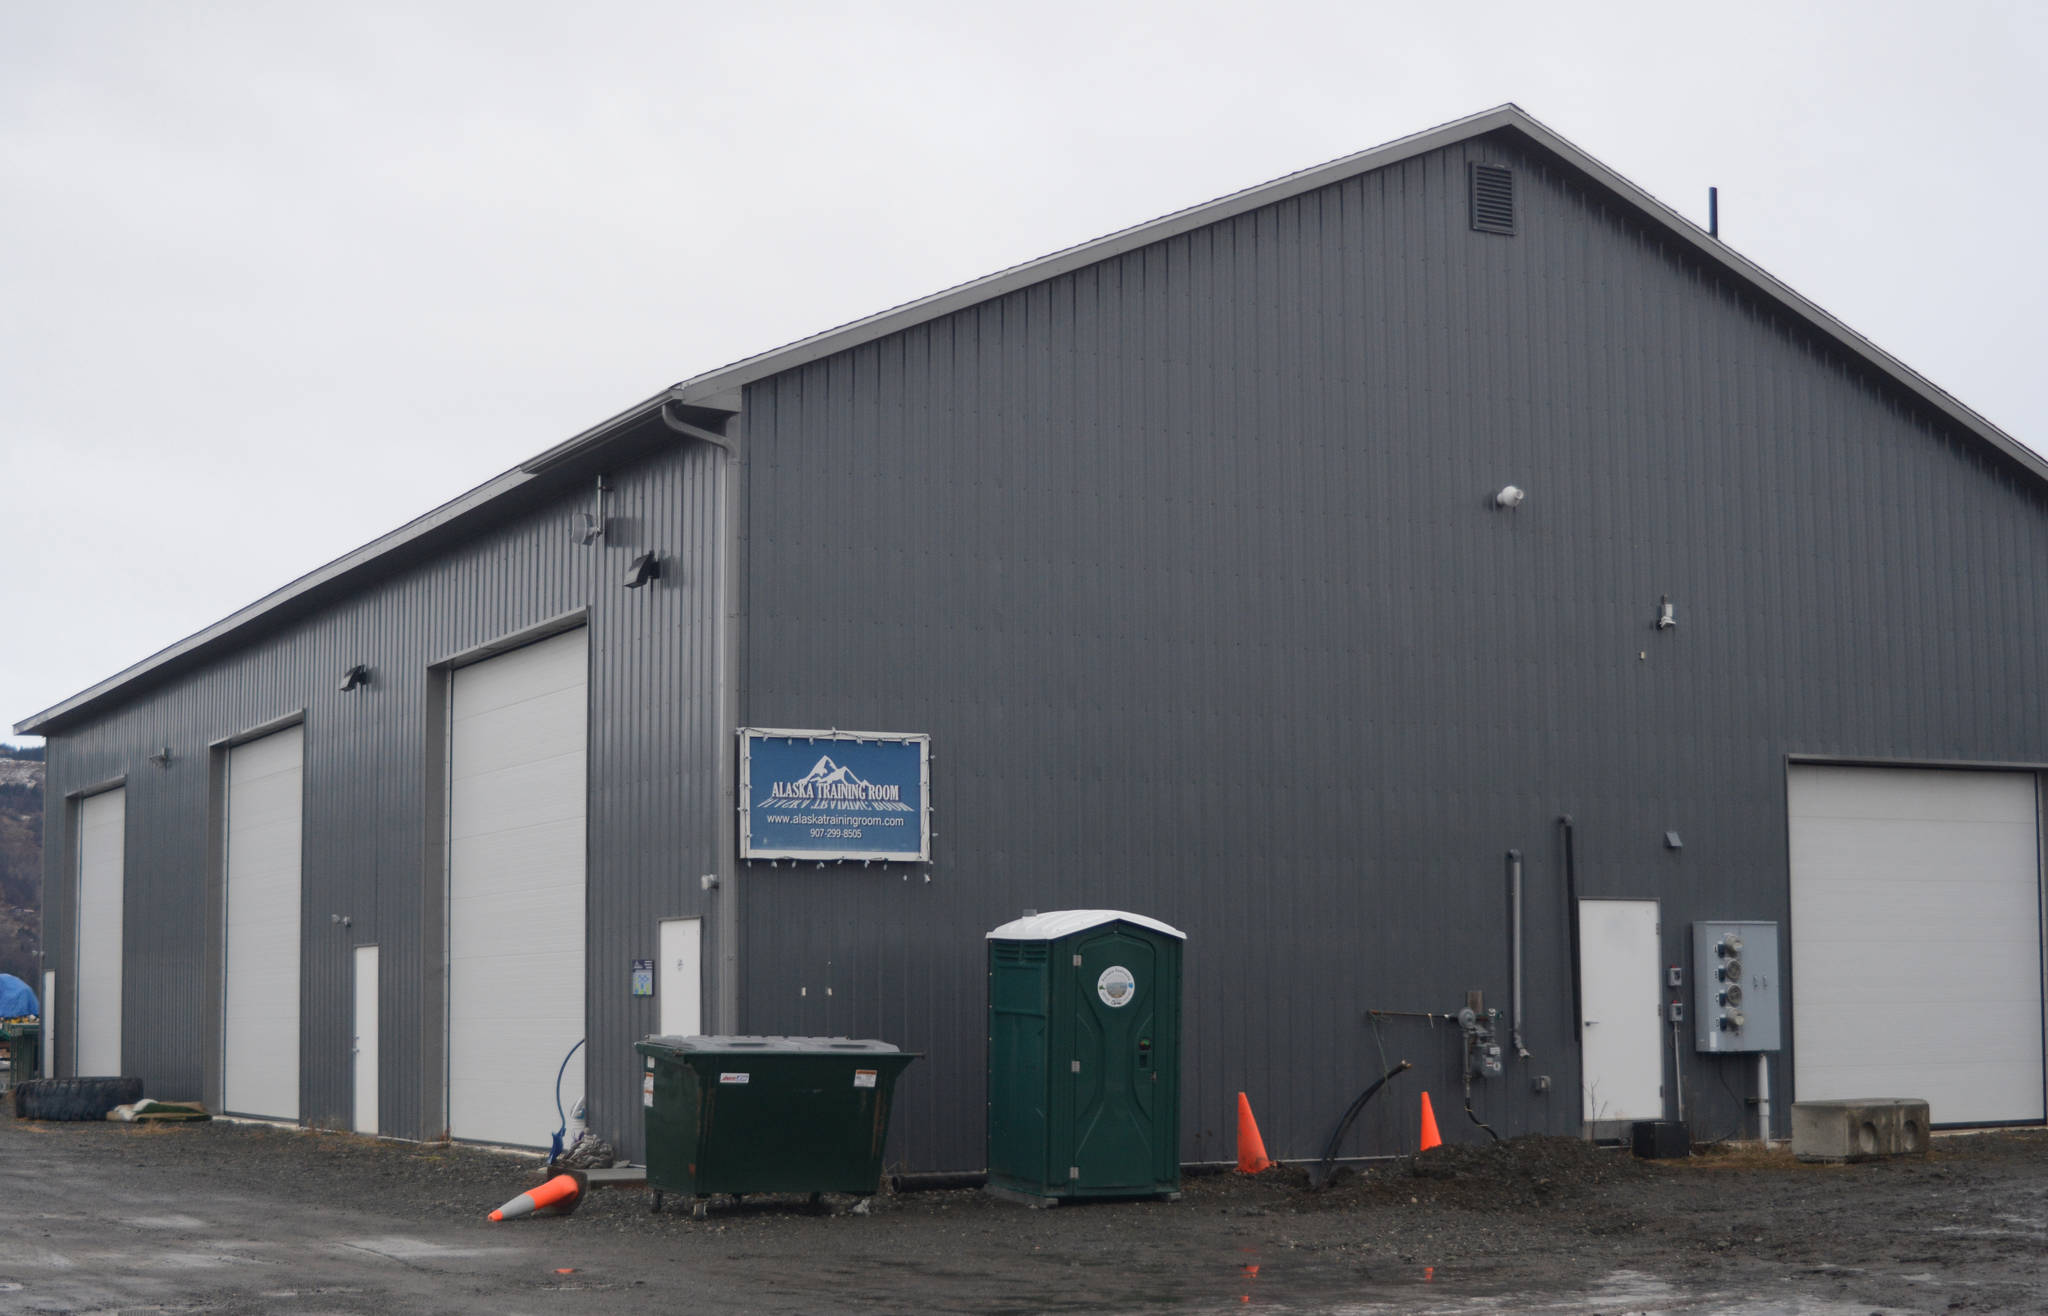 Alaska Loven It plans to operate a marijuana standard cultivation facility in this 5,000-square-foot building, shown in this Tuesday, Jan. 16, 2018 photo, on Kachemak Drive near the east end of the Homer Airport runway. Alaska Training Room currently uses the front of the building, but owner Mary Jo Campbell said she plans to move this month to a new location on Ocean Drive. (Photo by Michael Armstrong/Homer News).